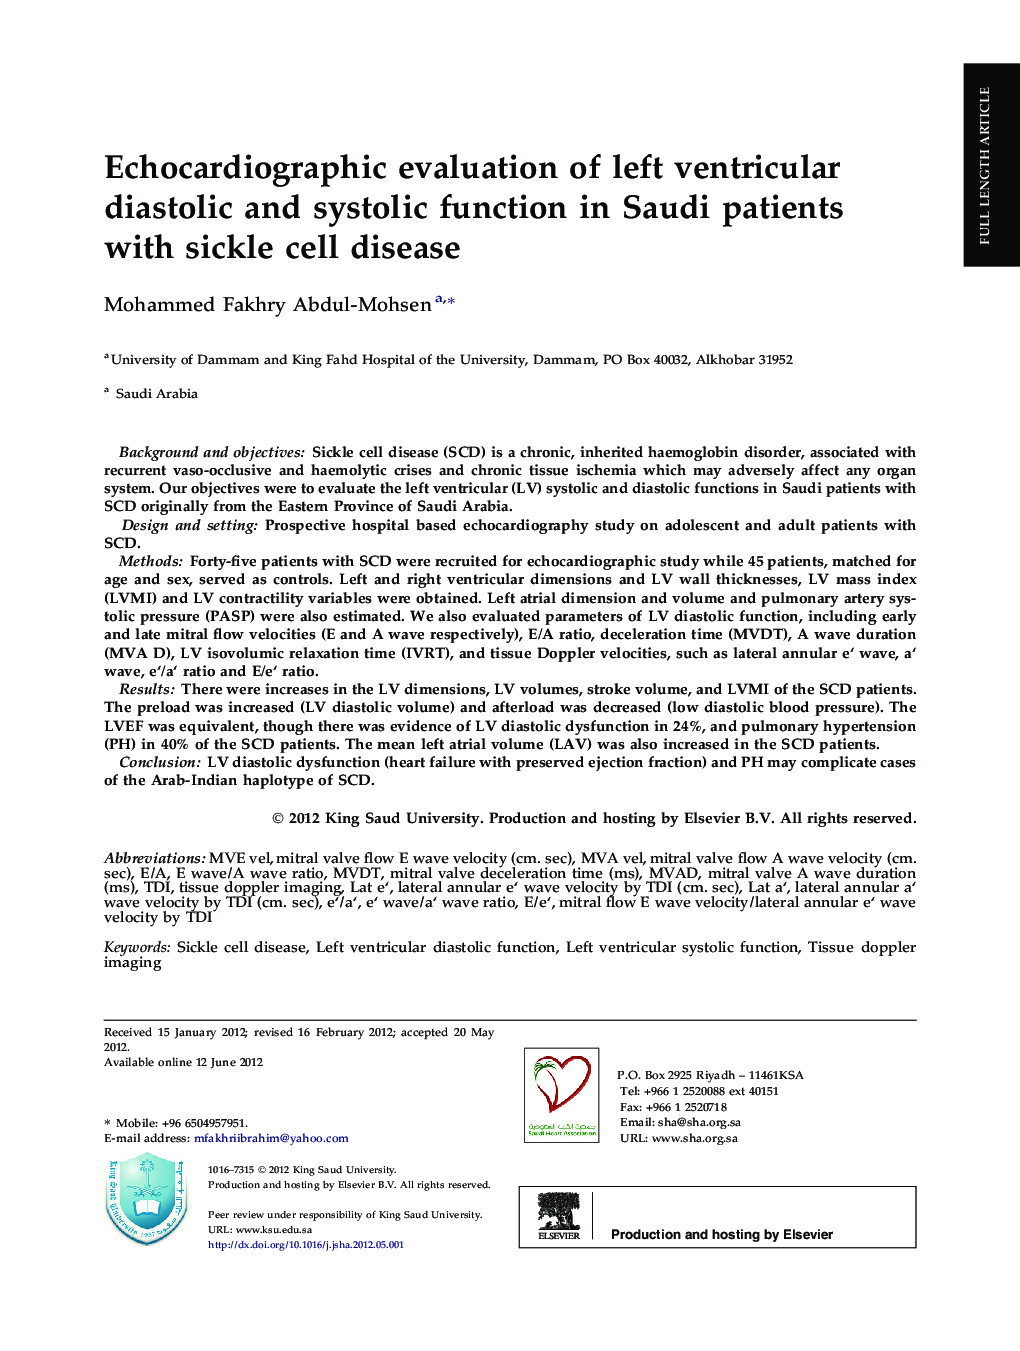 Echocardiographic evaluation of left ventricular diastolic and systolic function in Saudi patients with sickle cell disease 